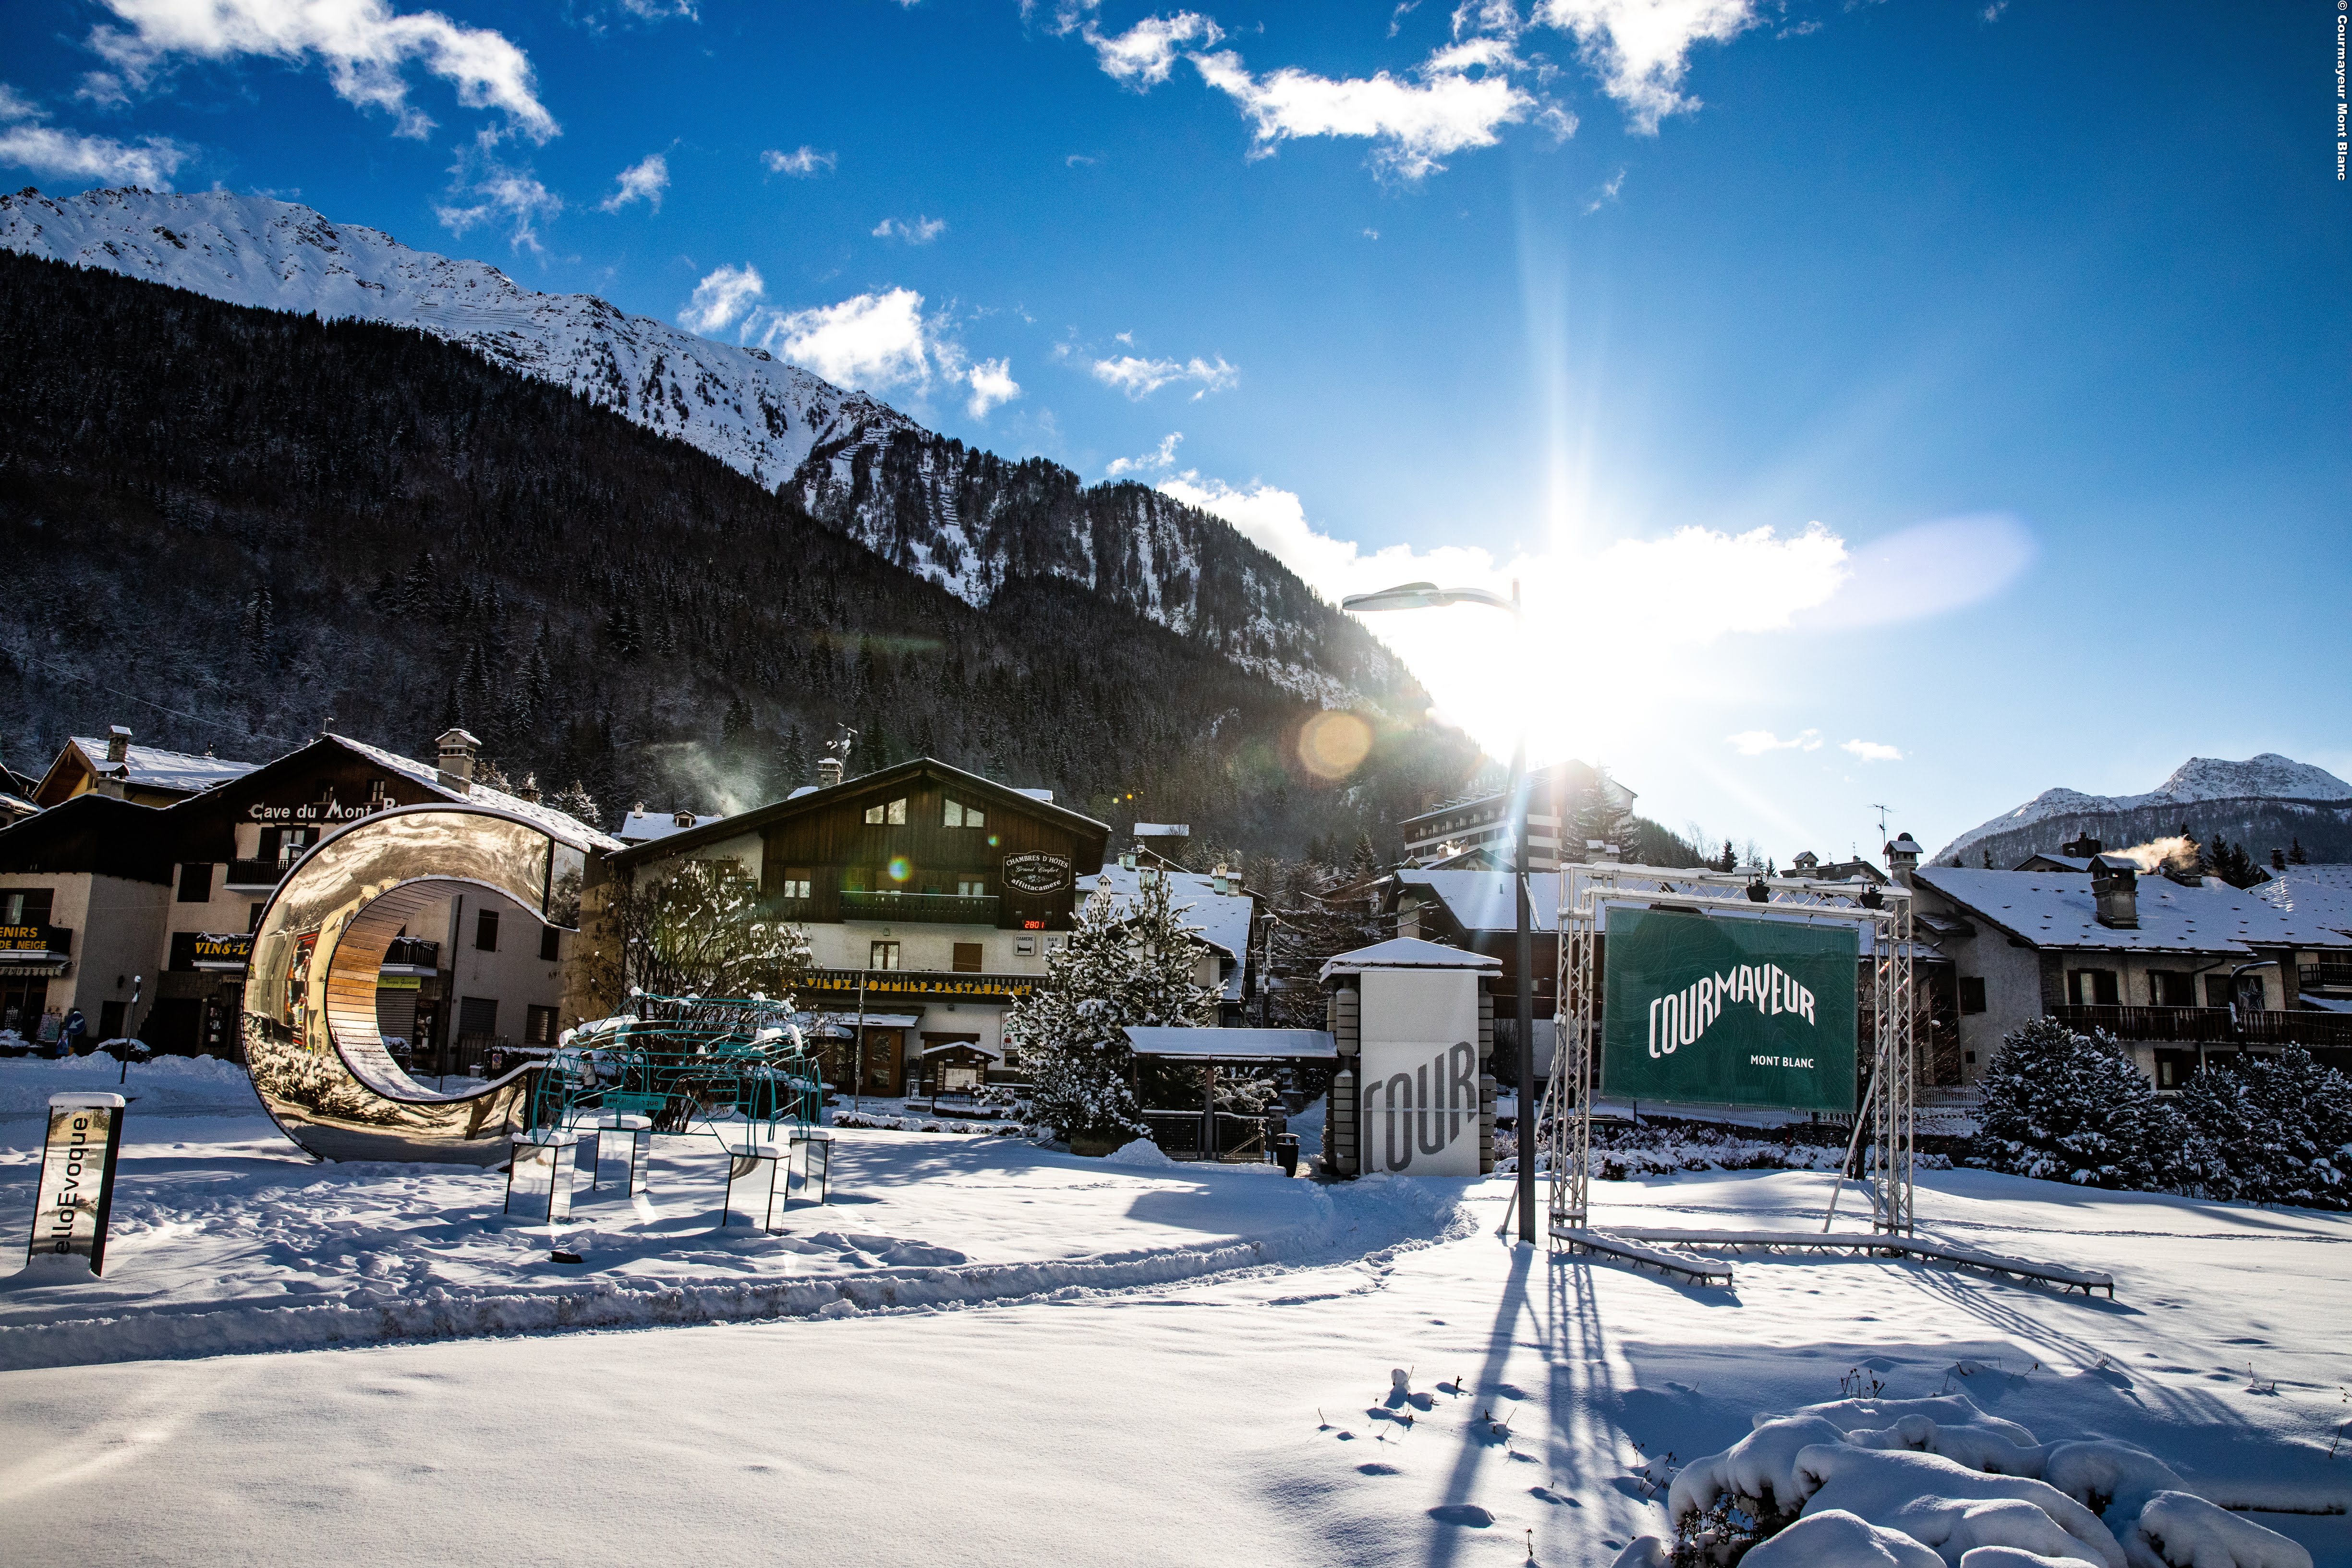 Courmayeur in the Italian Alps is well worth exploring